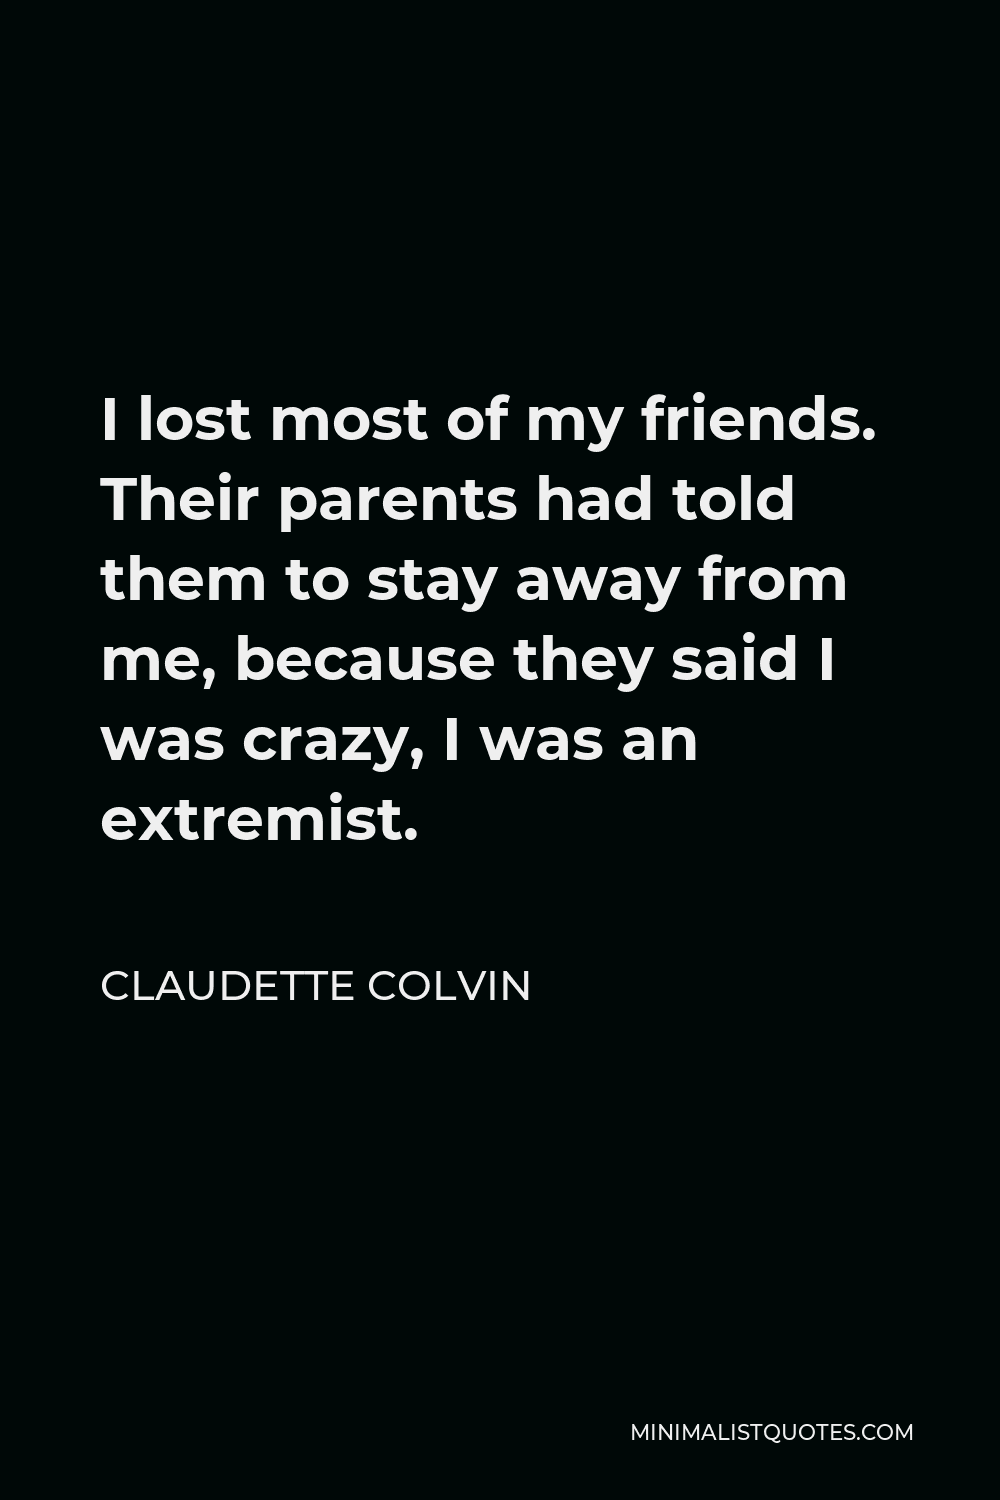 Claudette Colvin Quote - I lost most of my friends. Their parents had told them to stay away from me, because they said I was crazy, I was an extremist.